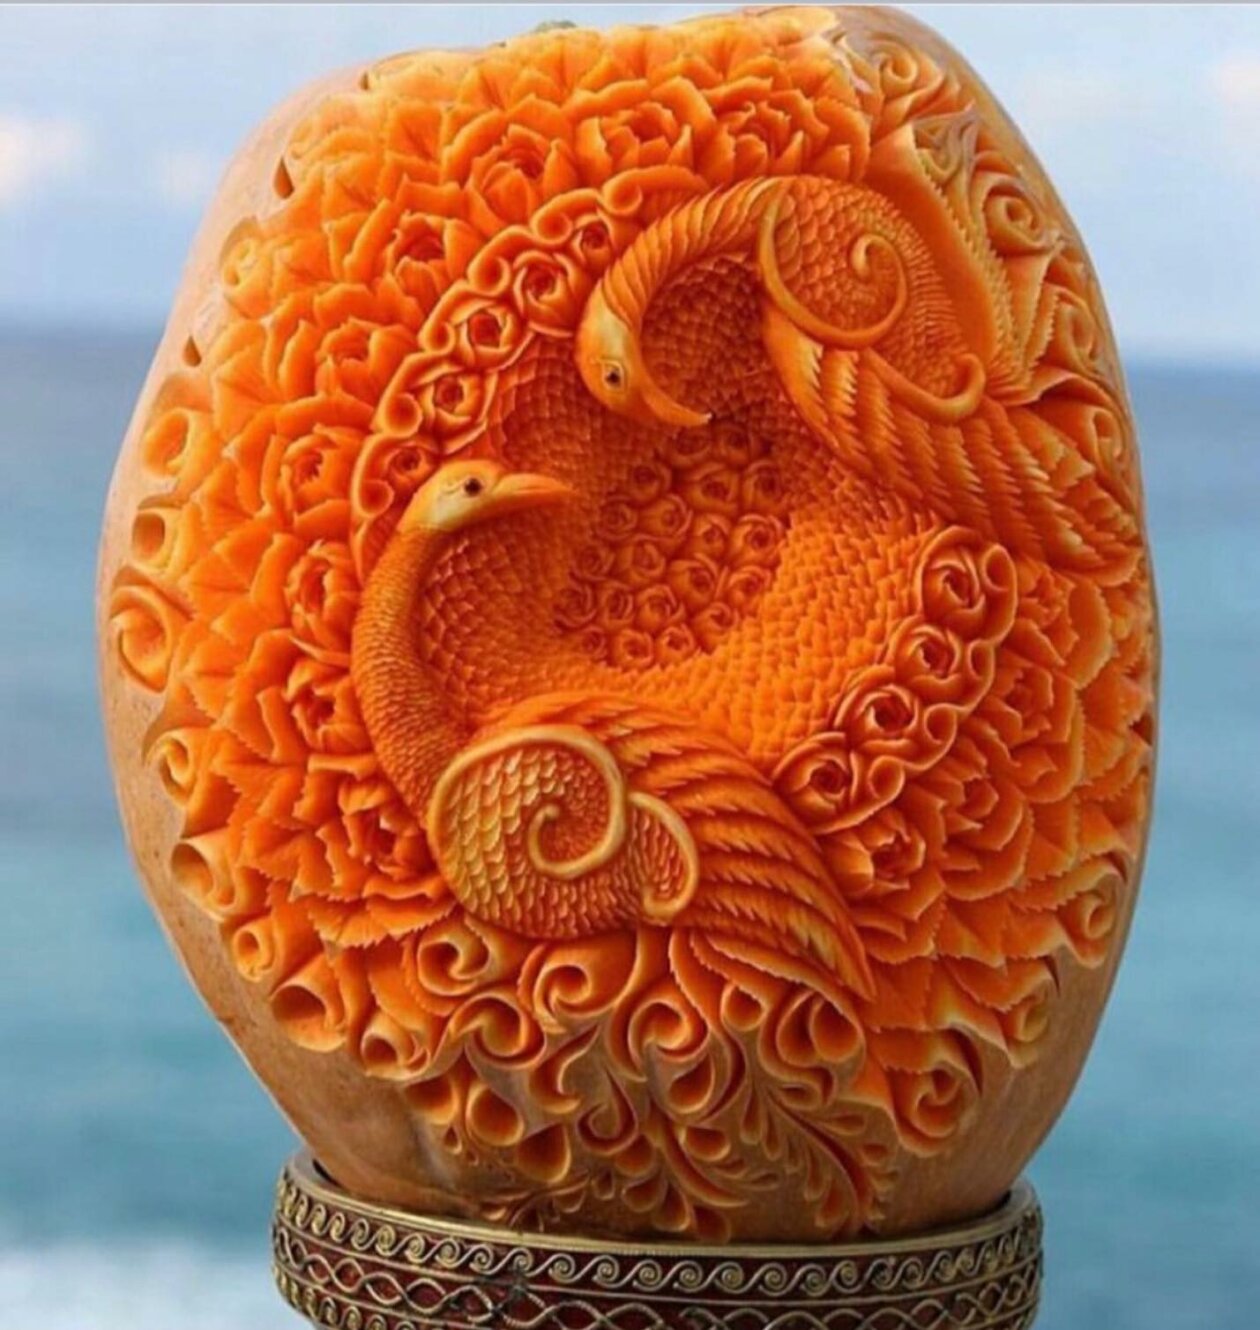 Superb Fruit And Vegetable Carvings By Daniele Barresi 21